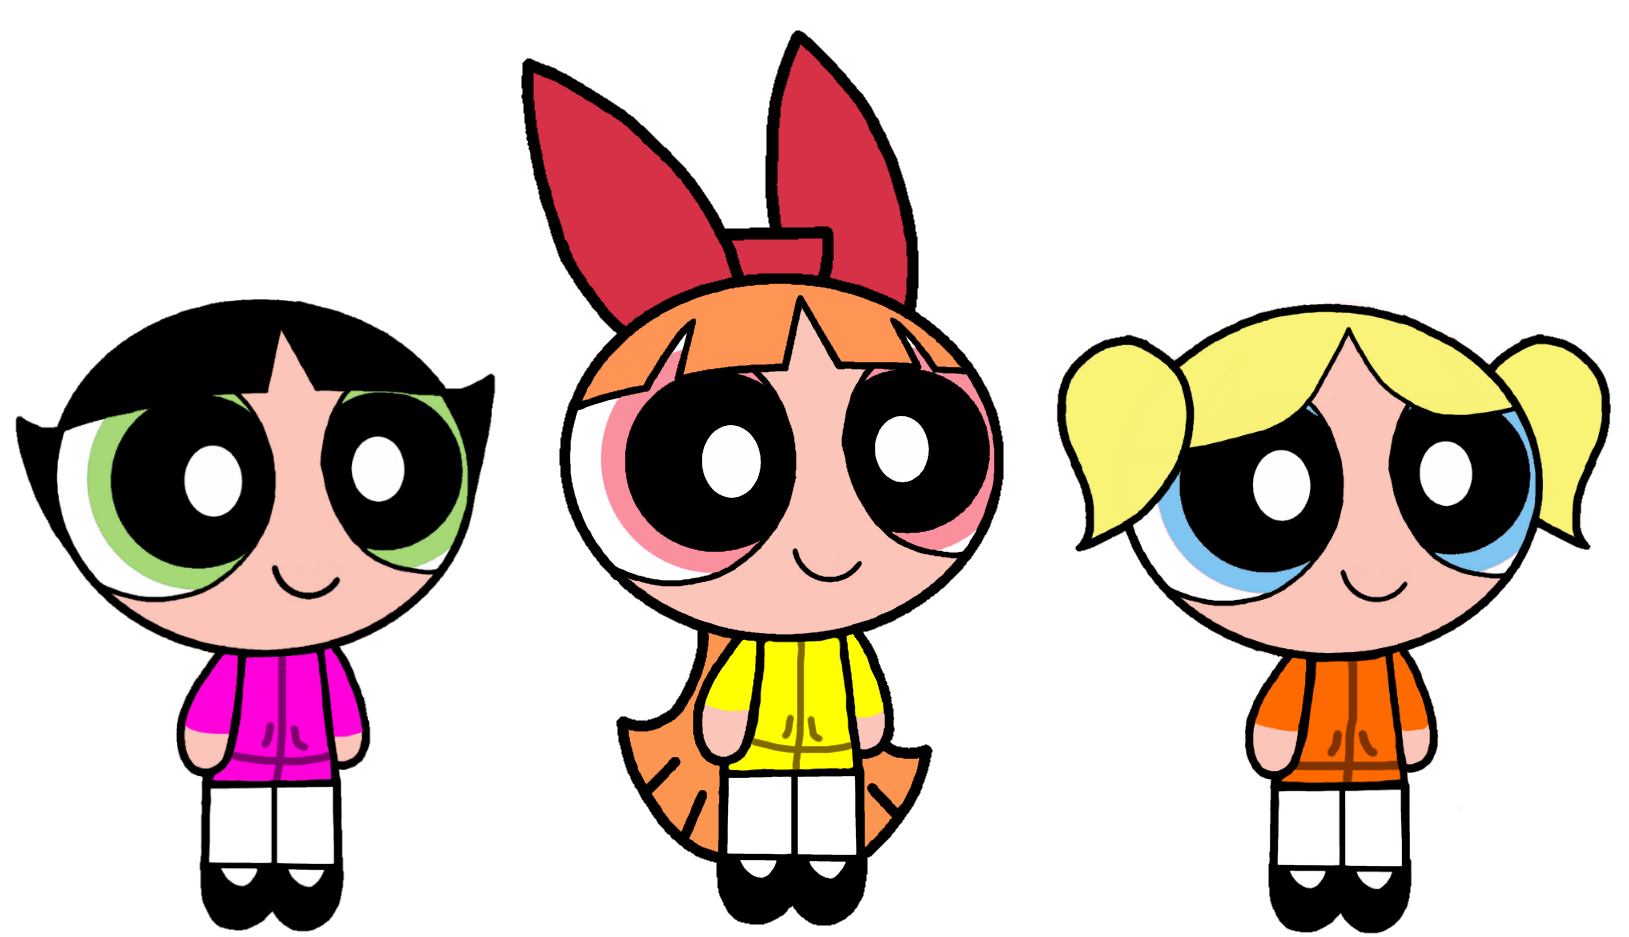 PPG wearin jackets by NicholasP1996 on DeviantArt